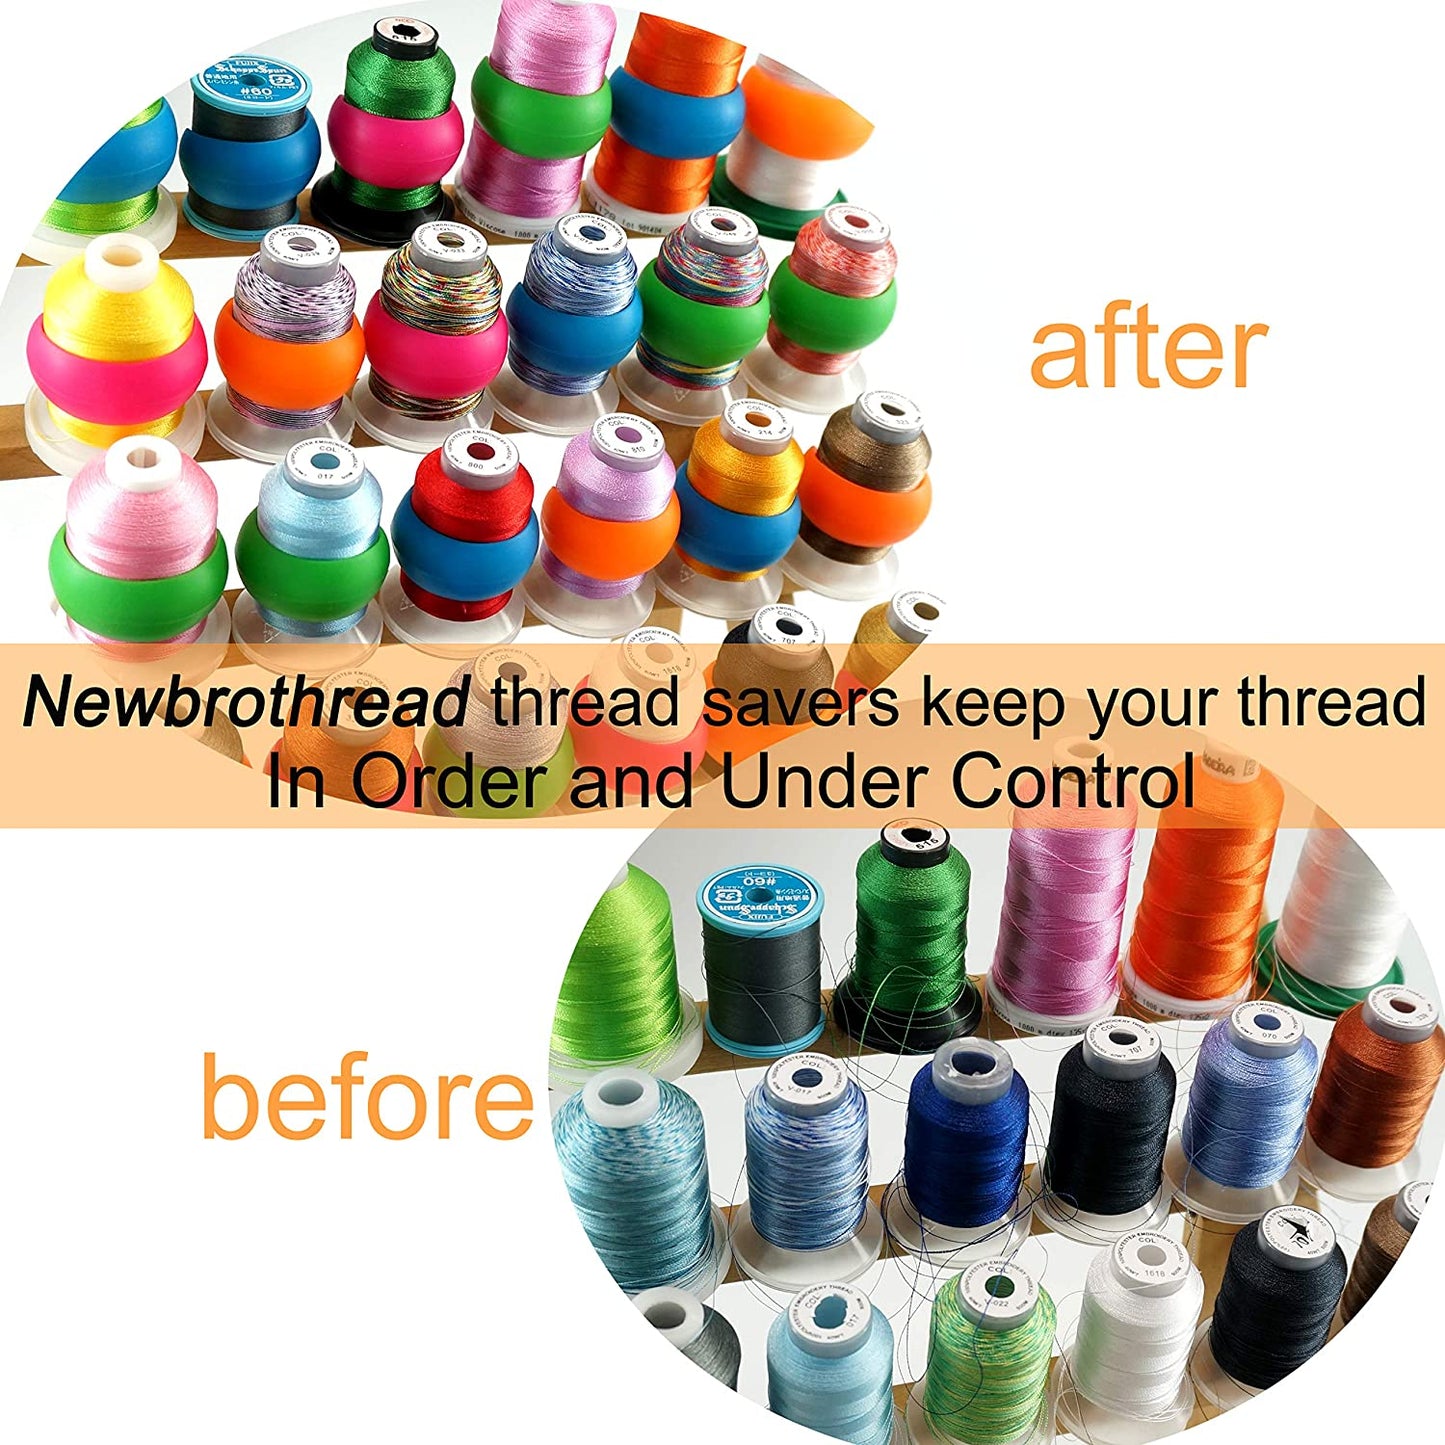 New Brothread Thread Spool Savers/Spool Huggers - Prevent Thread Tails from Unwinding - No Loose Ends for Sewing and Embroidery Machine Thread Spools